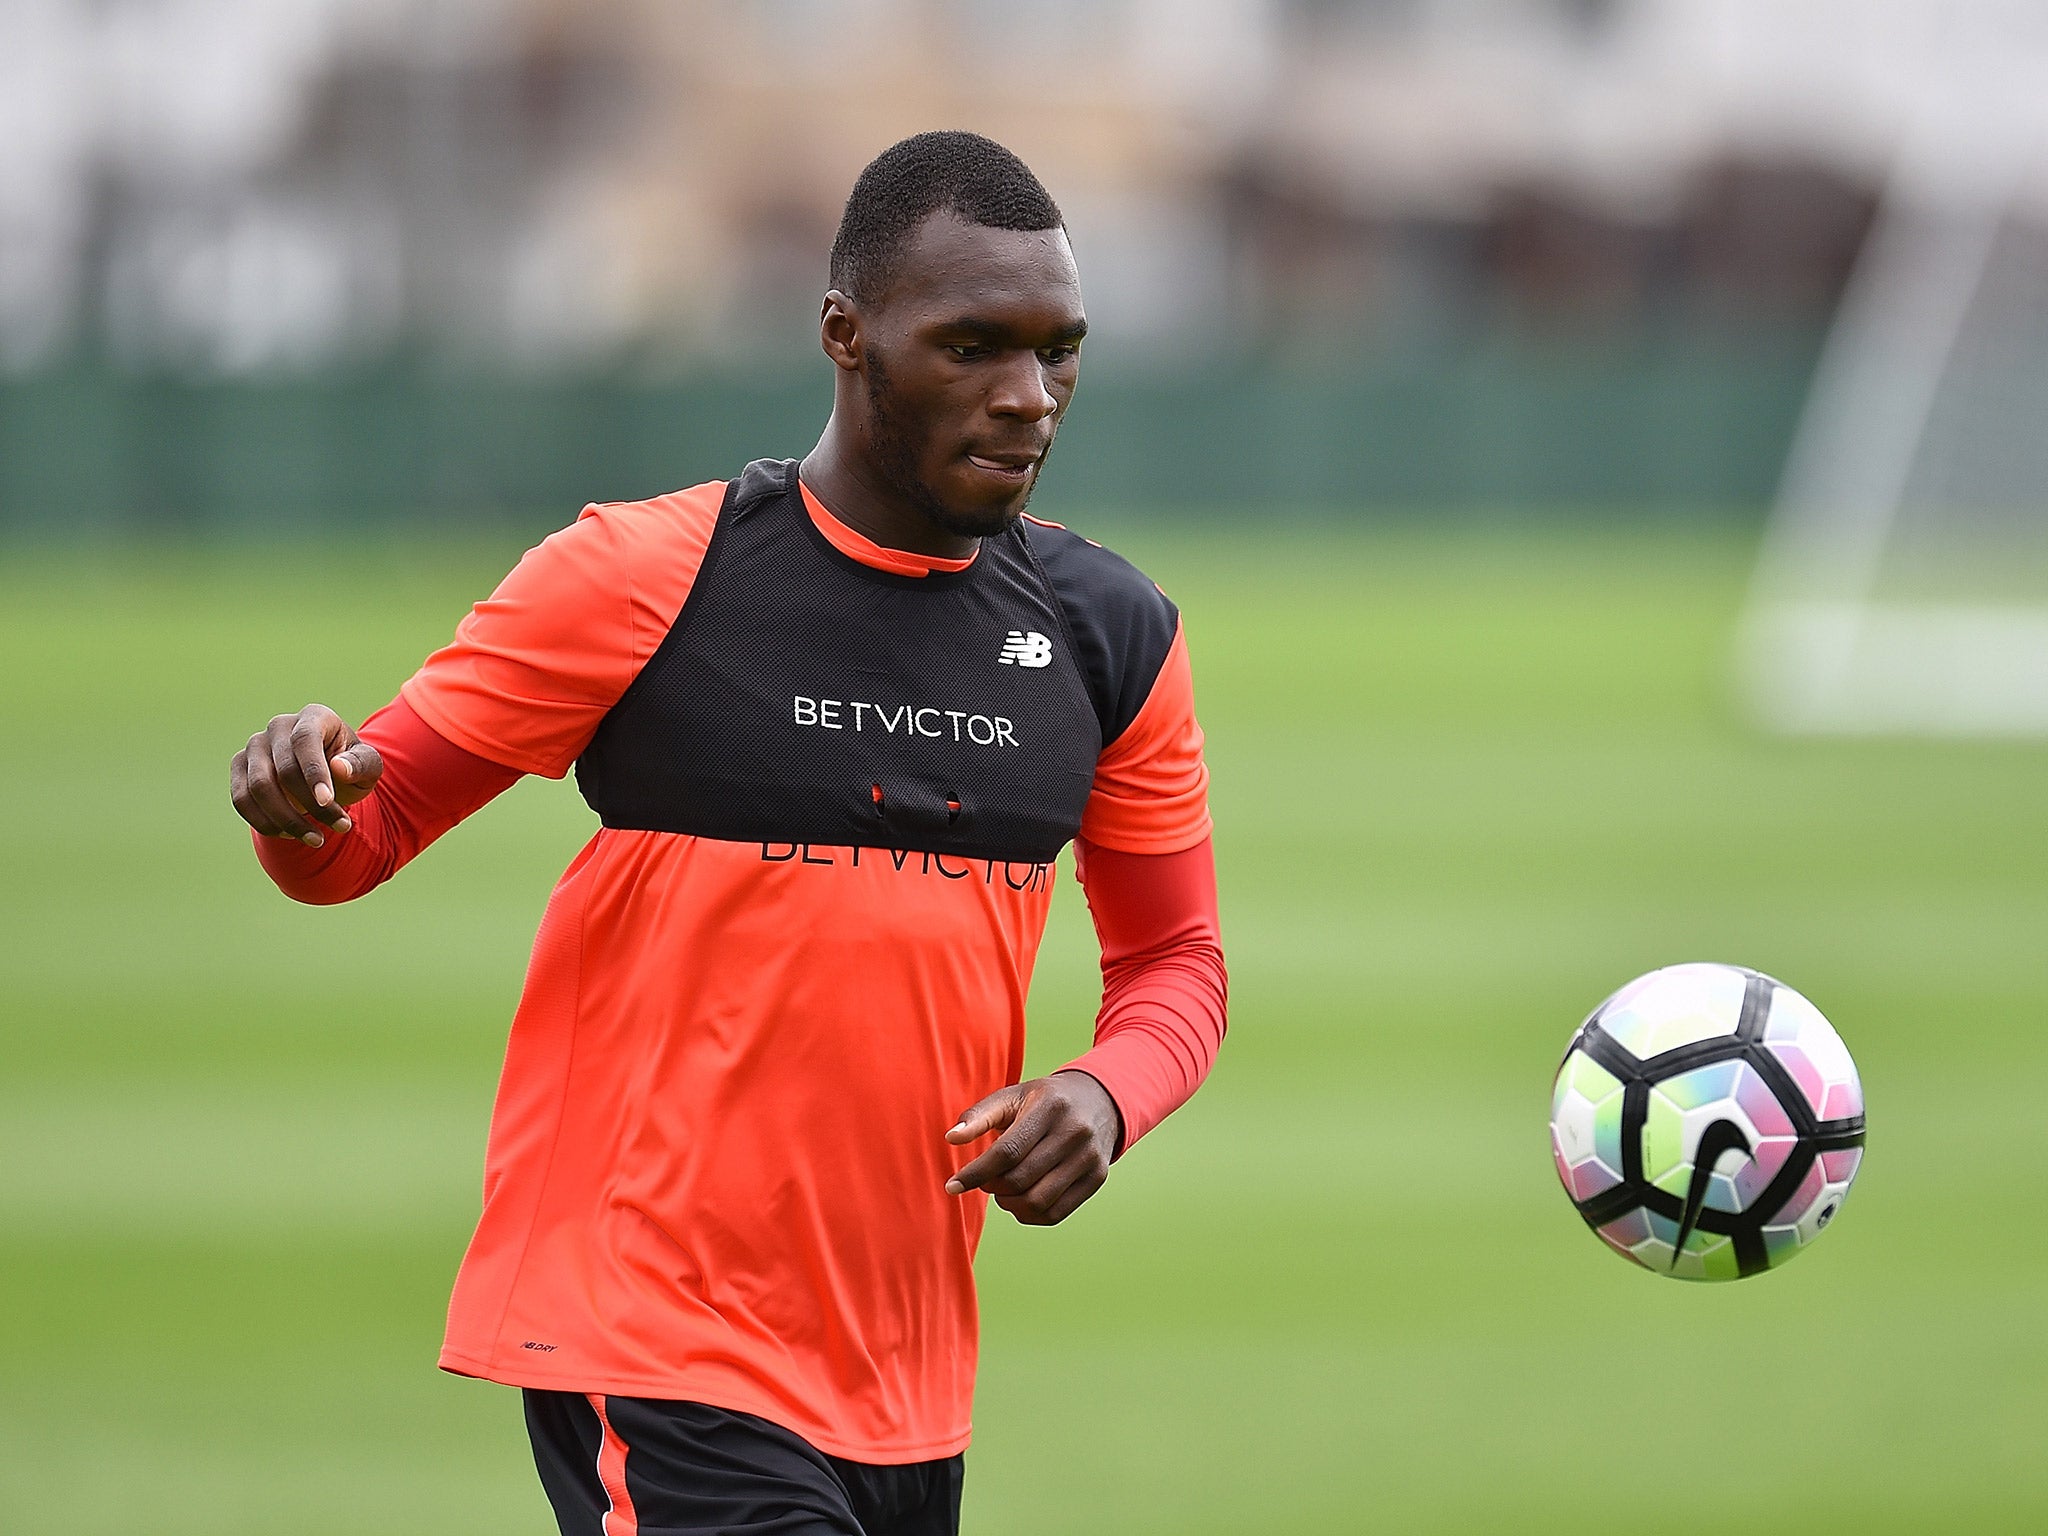 Christian Benteke is having a medical ahead of his £32m move to Crystal Palace